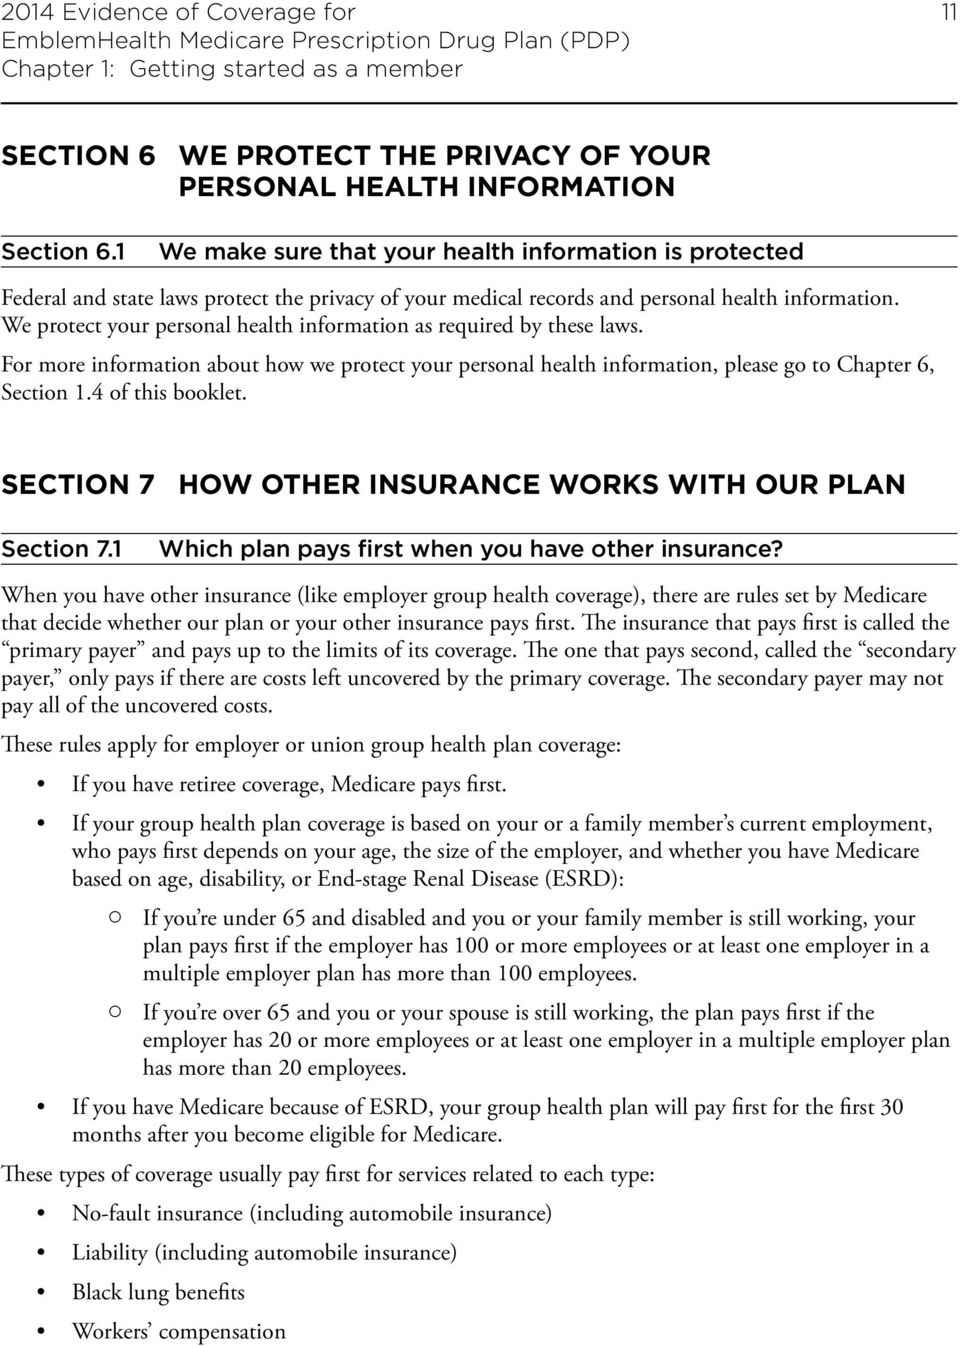 We protect your personal health information as required by these laws. For more information about how we protect your personal health information, please go to Chapter 6, Section 1.4 of this booklet.